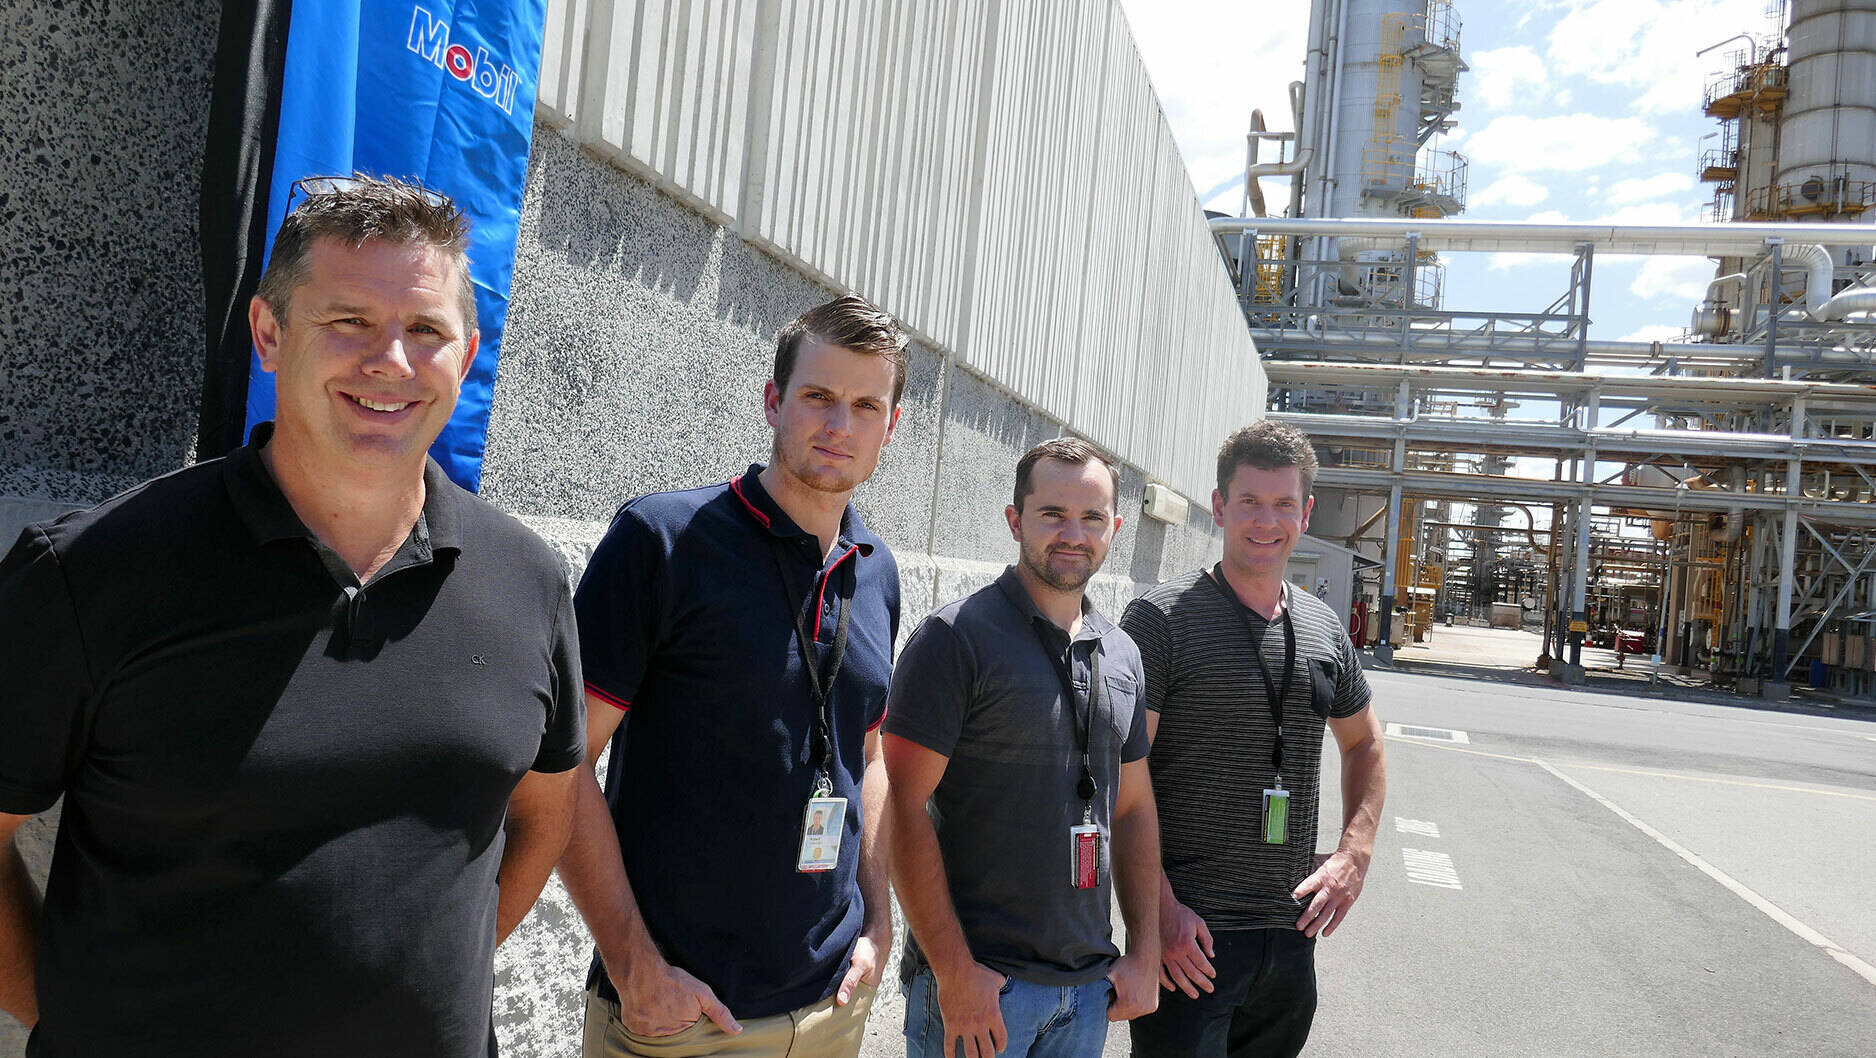 Image Photo New recruits Robert Creasey, Michael Noden and James Dearnaley with Altona Refinery Training Coordinator Mark Duke (pictured left).